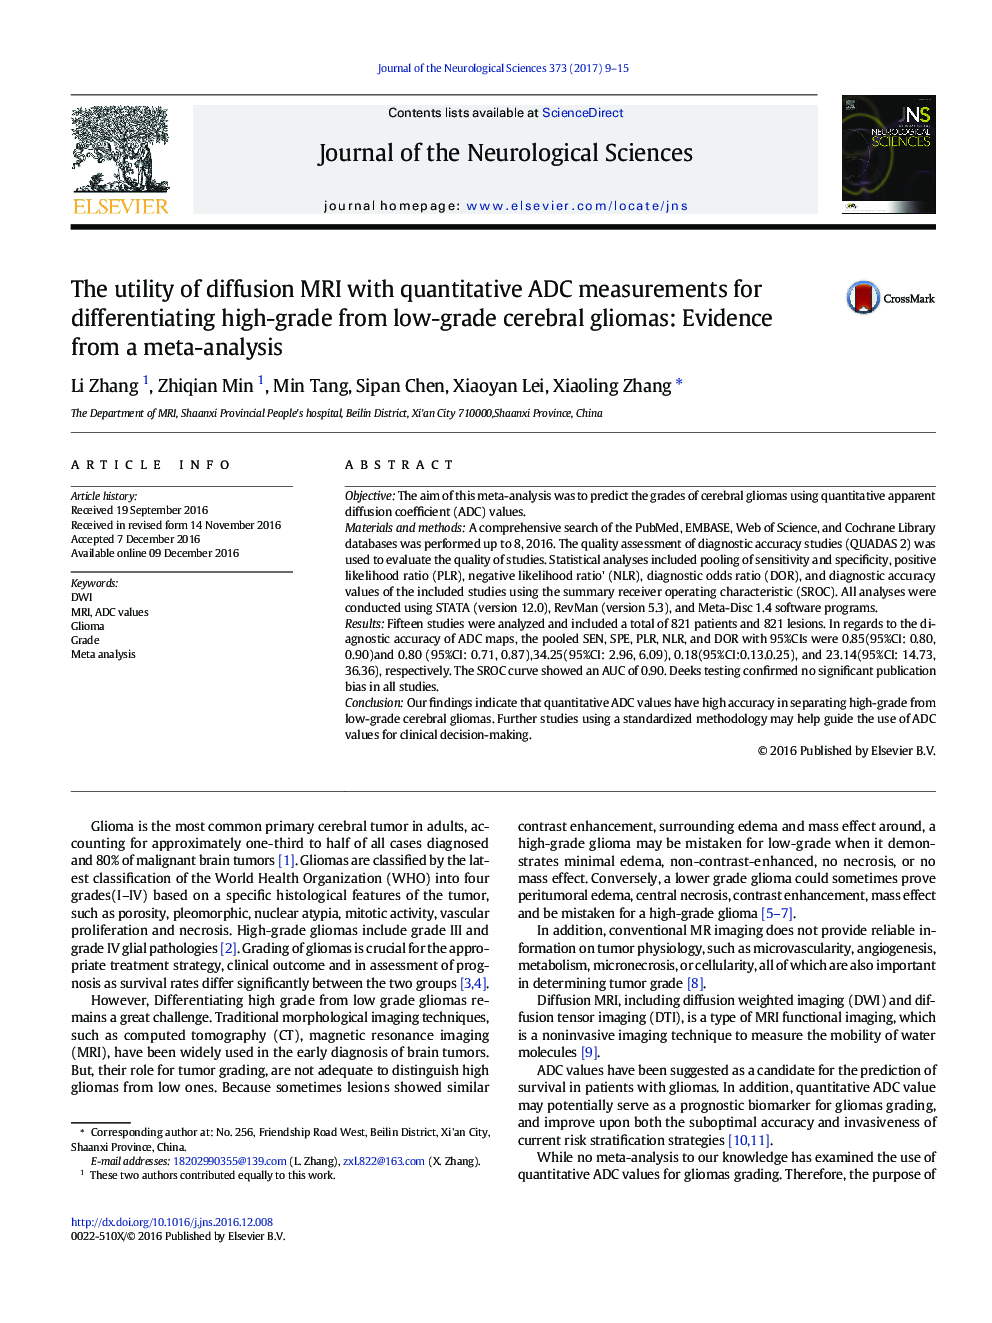 The utility of diffusion MRI with quantitative ADC measurements for differentiating high-grade from low-grade cerebral gliomas: Evidence from a meta-analysis